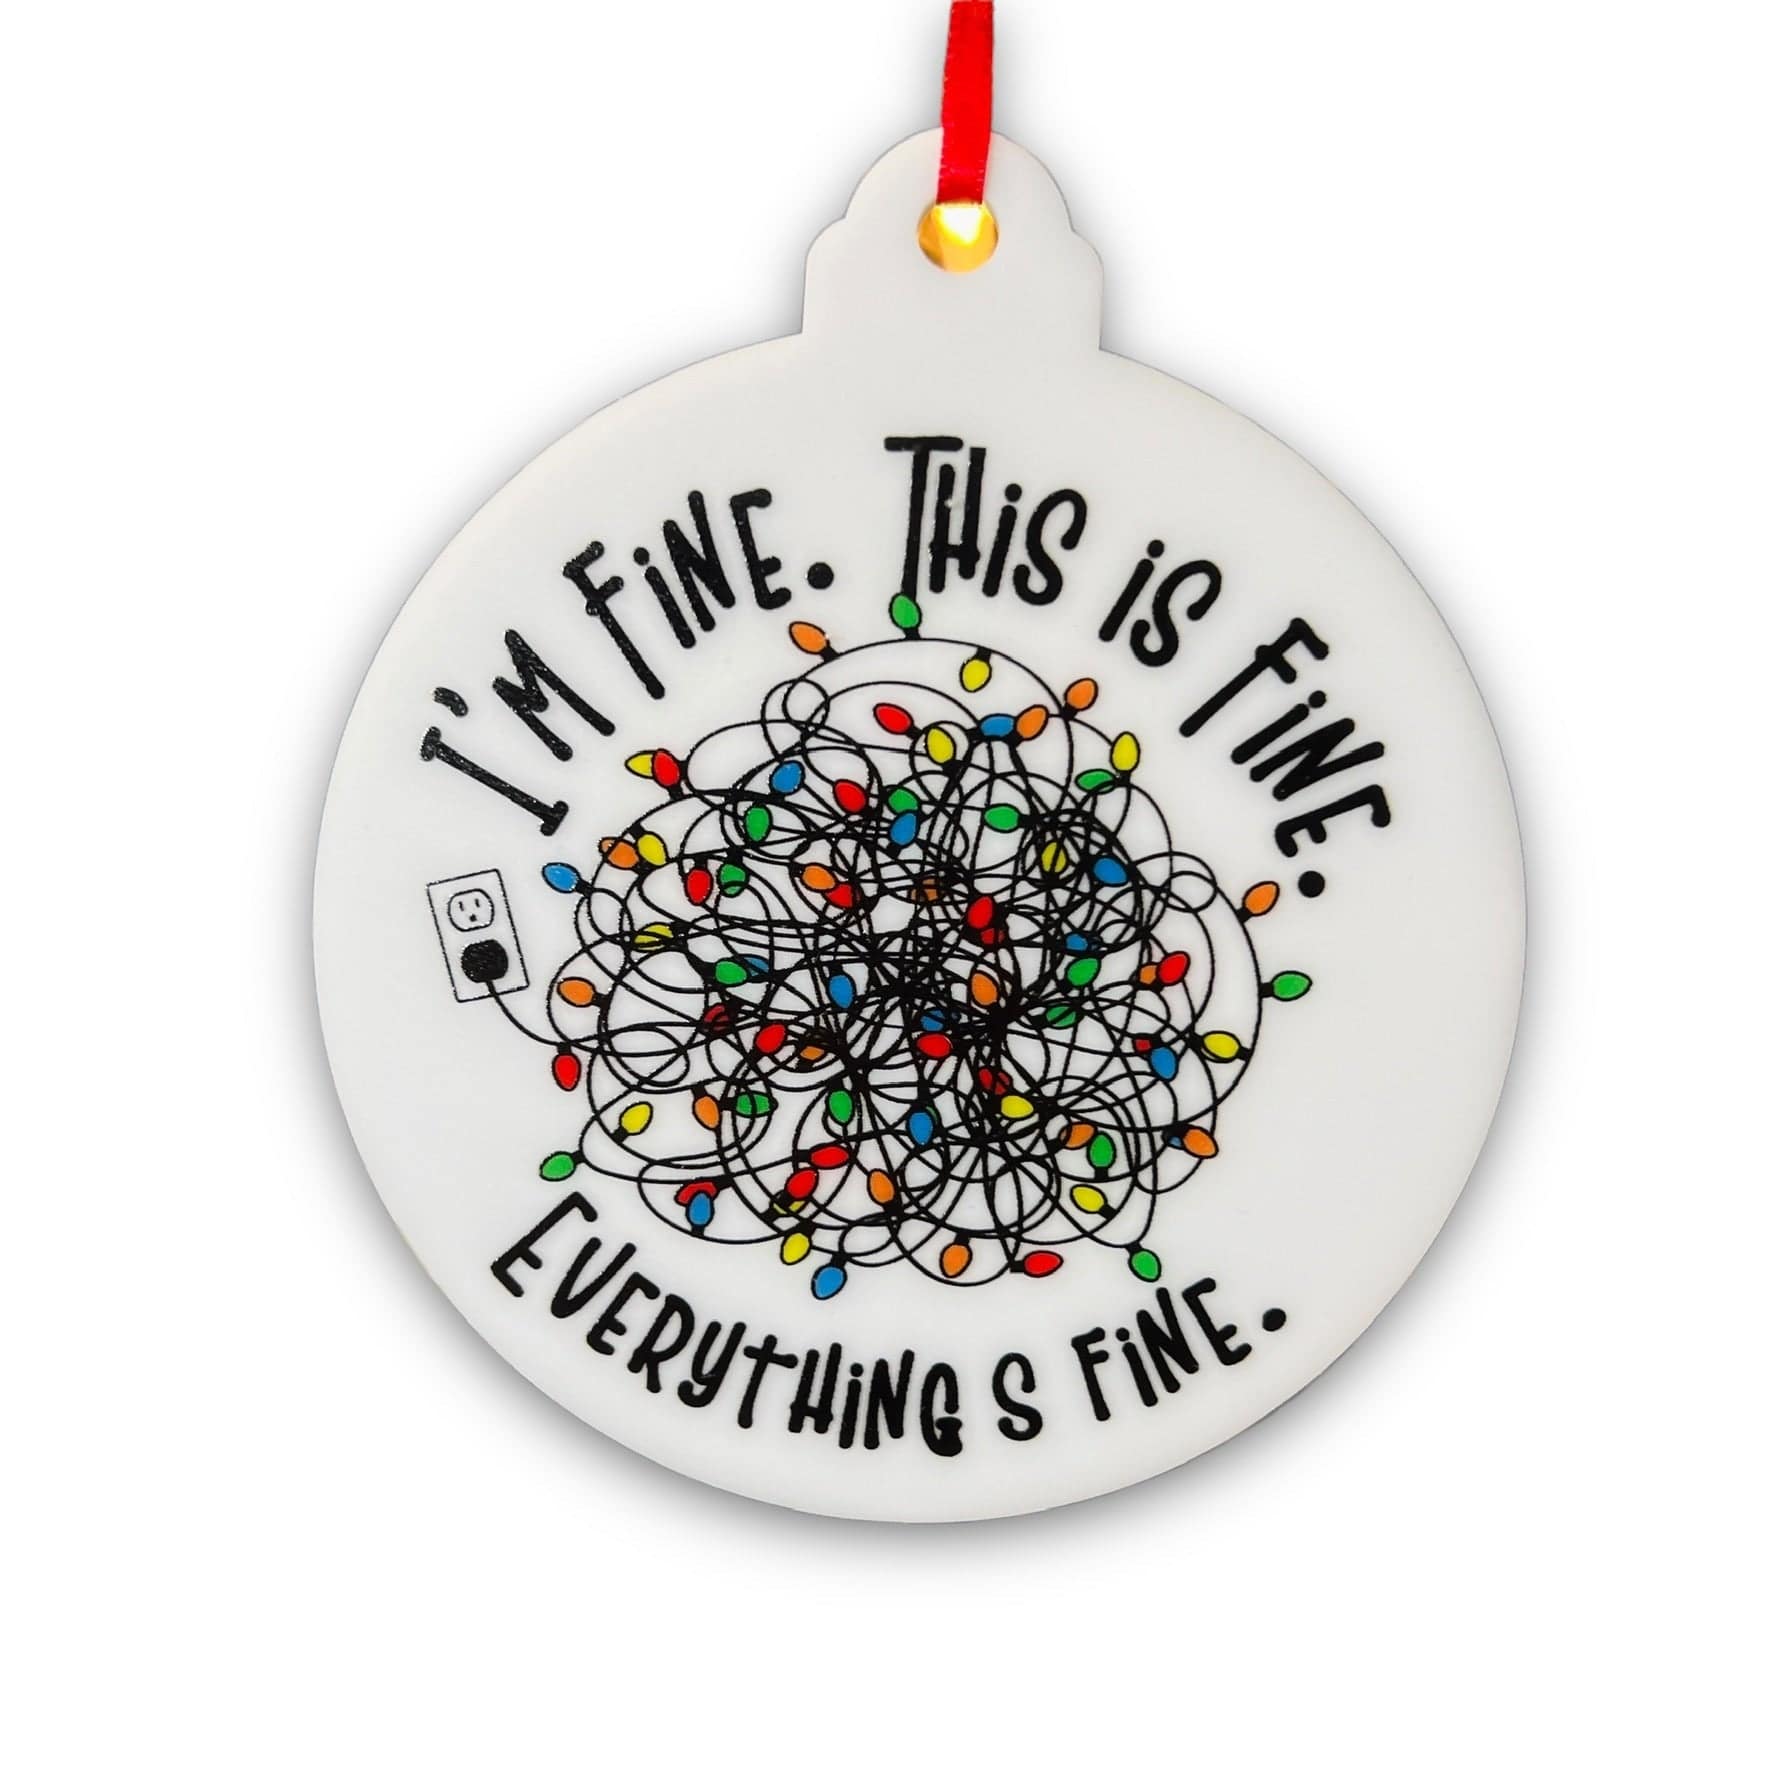 I'm Fine. This is Fine. Everything's Fine Ornament - Sticks & Doodles